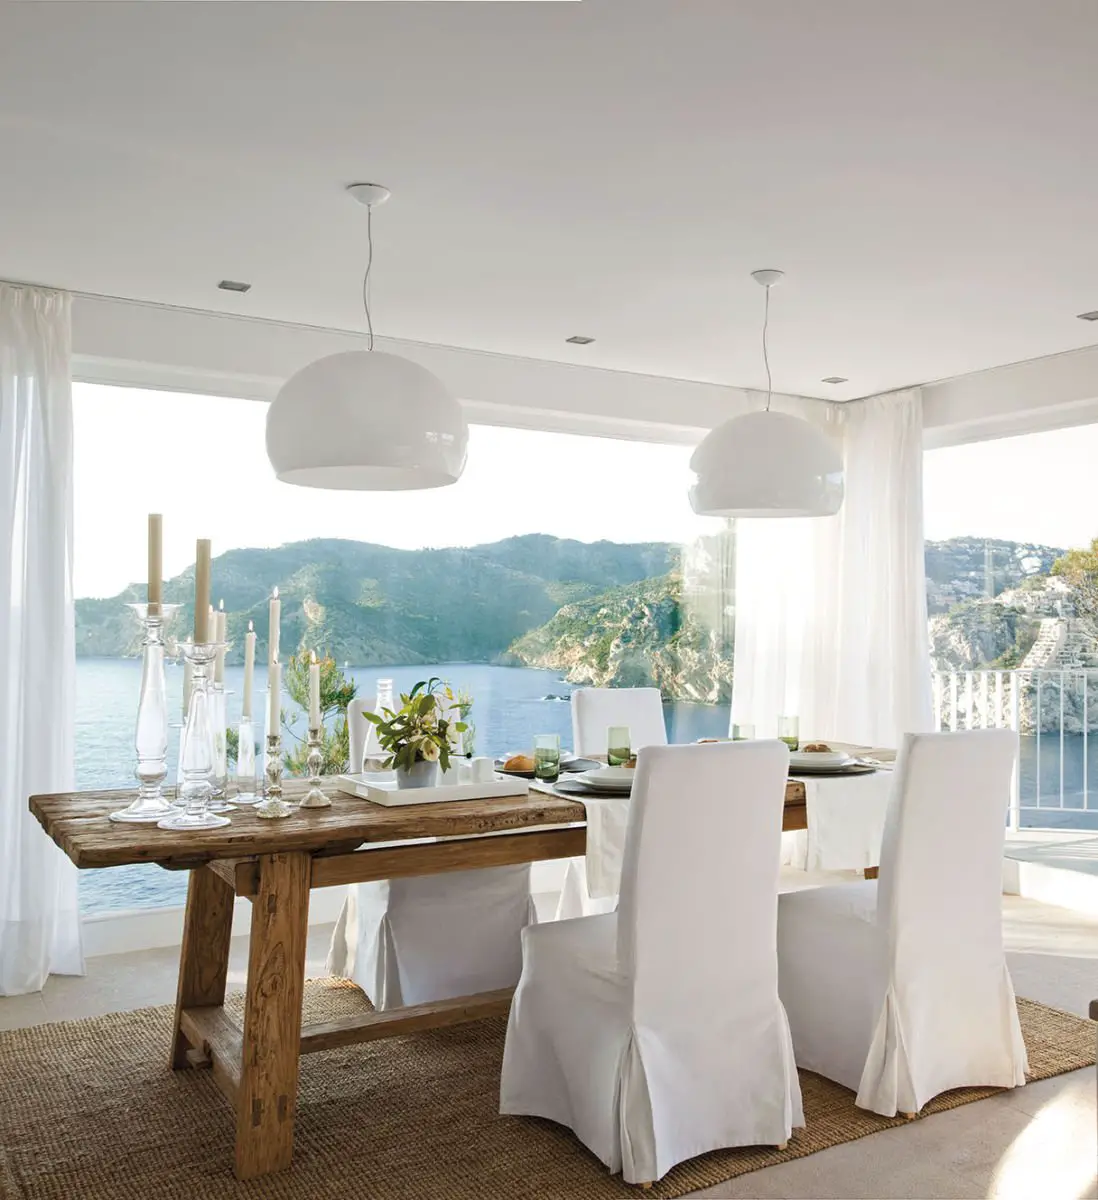 A white dining room in a house with a view of the ocean.